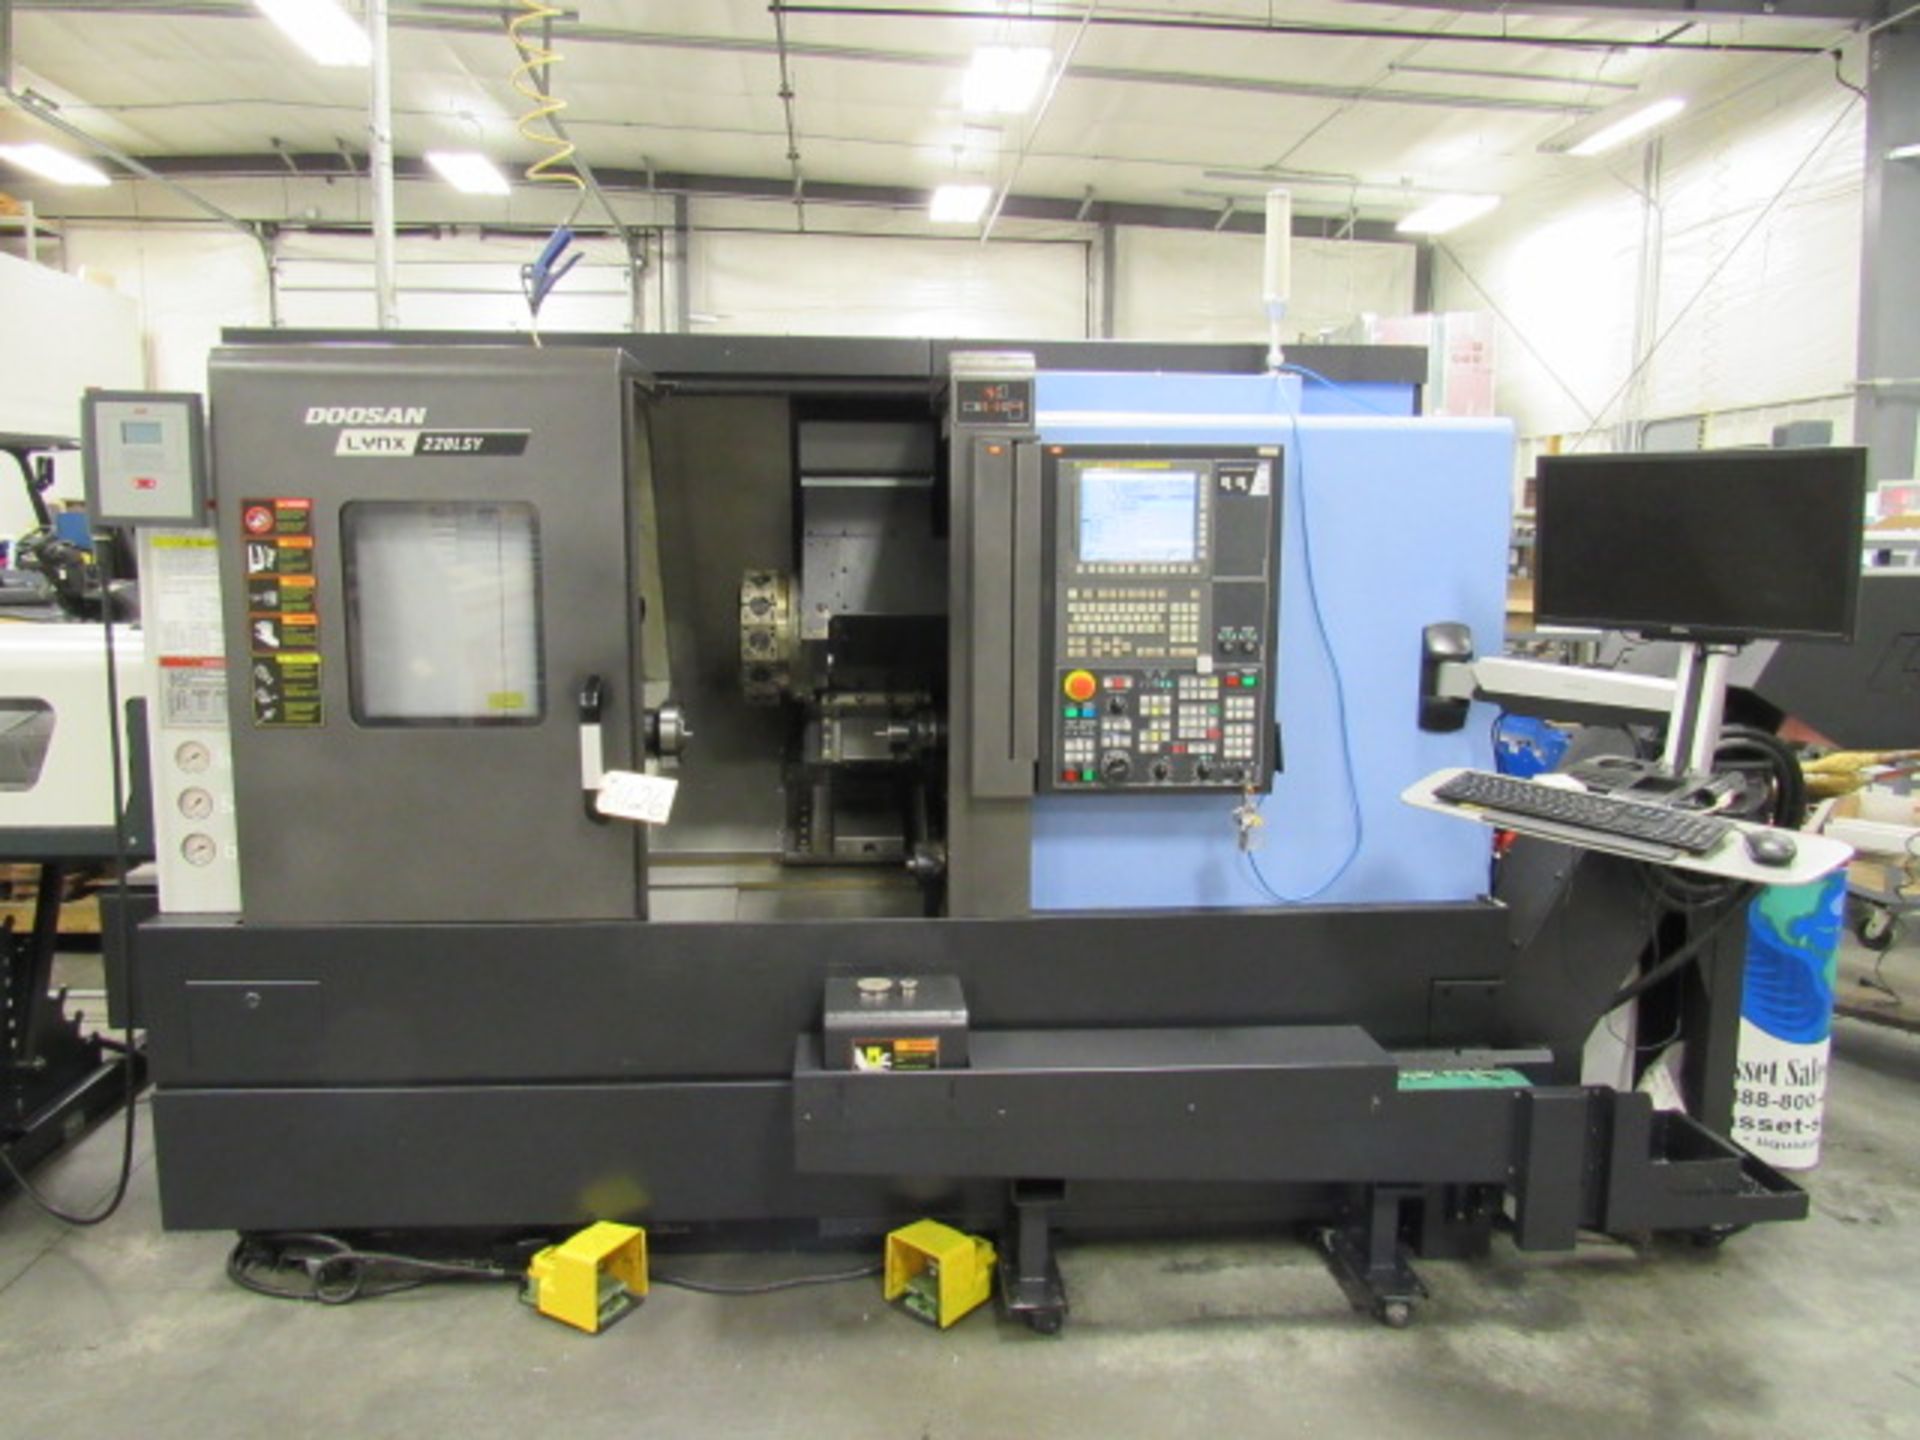 Doosan Lynx 220LSY CNC Turning Center with Sub Spindle, Y-Axis, & Live Milling, Collet Chuck (Main), - Image 8 of 8